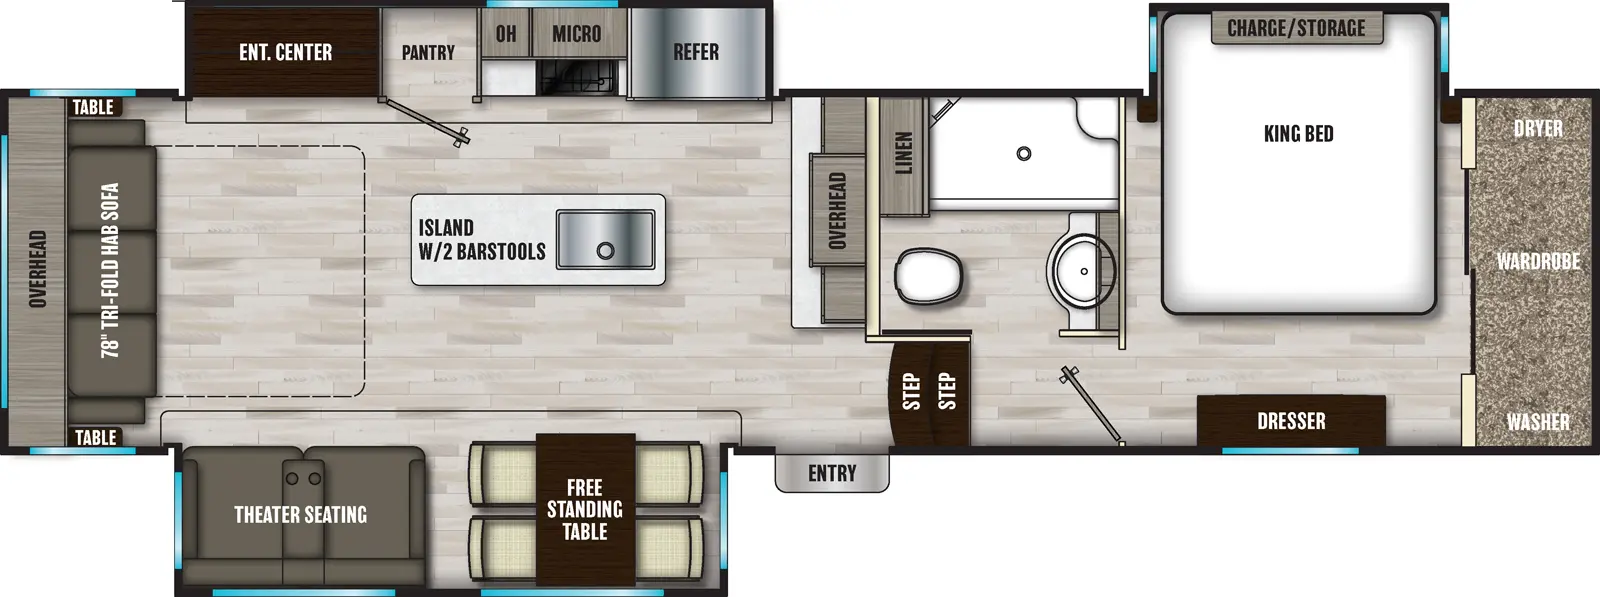 The 336RL has three slideouts and one entry. Interior layout front to back: front bedroom with off-door side king bed slideout, front wardrobe with washer and dryer, and door side dresser; off-door side full bathroom with linen closet; two steps down to entry and main living area; counter and overhead cabinet along inner wall; kitchen island with two barstools and sink; off-door side slideout with refrigerator, microwave, countertop, pantry, and entertainment center; door side slideout with free-standing table and theater seating; rear tri-fold hide-a-bed sofa with overhead cabinet and tables on each side.